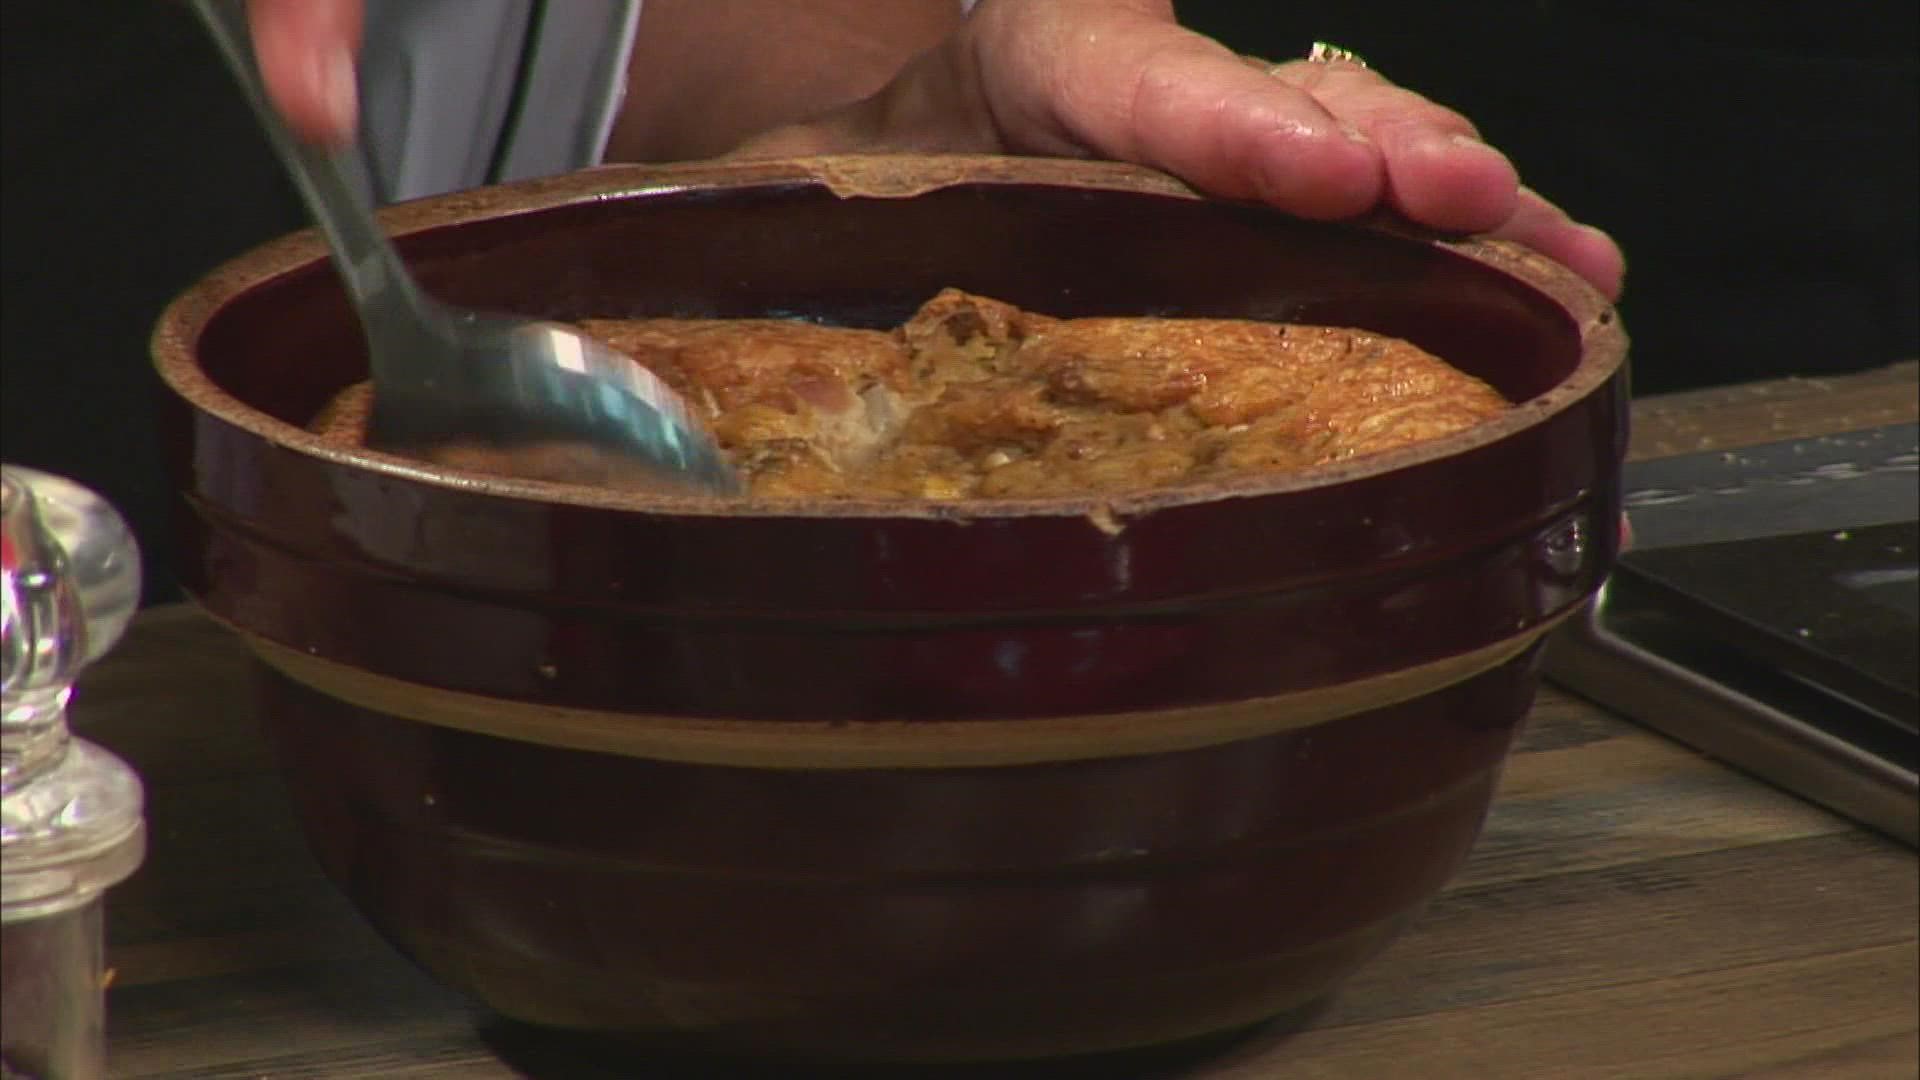 Lynn Archer, owner of Archer's on the Pier, is in the 207 Kitchen whipping up her family's famous clam soufflé.